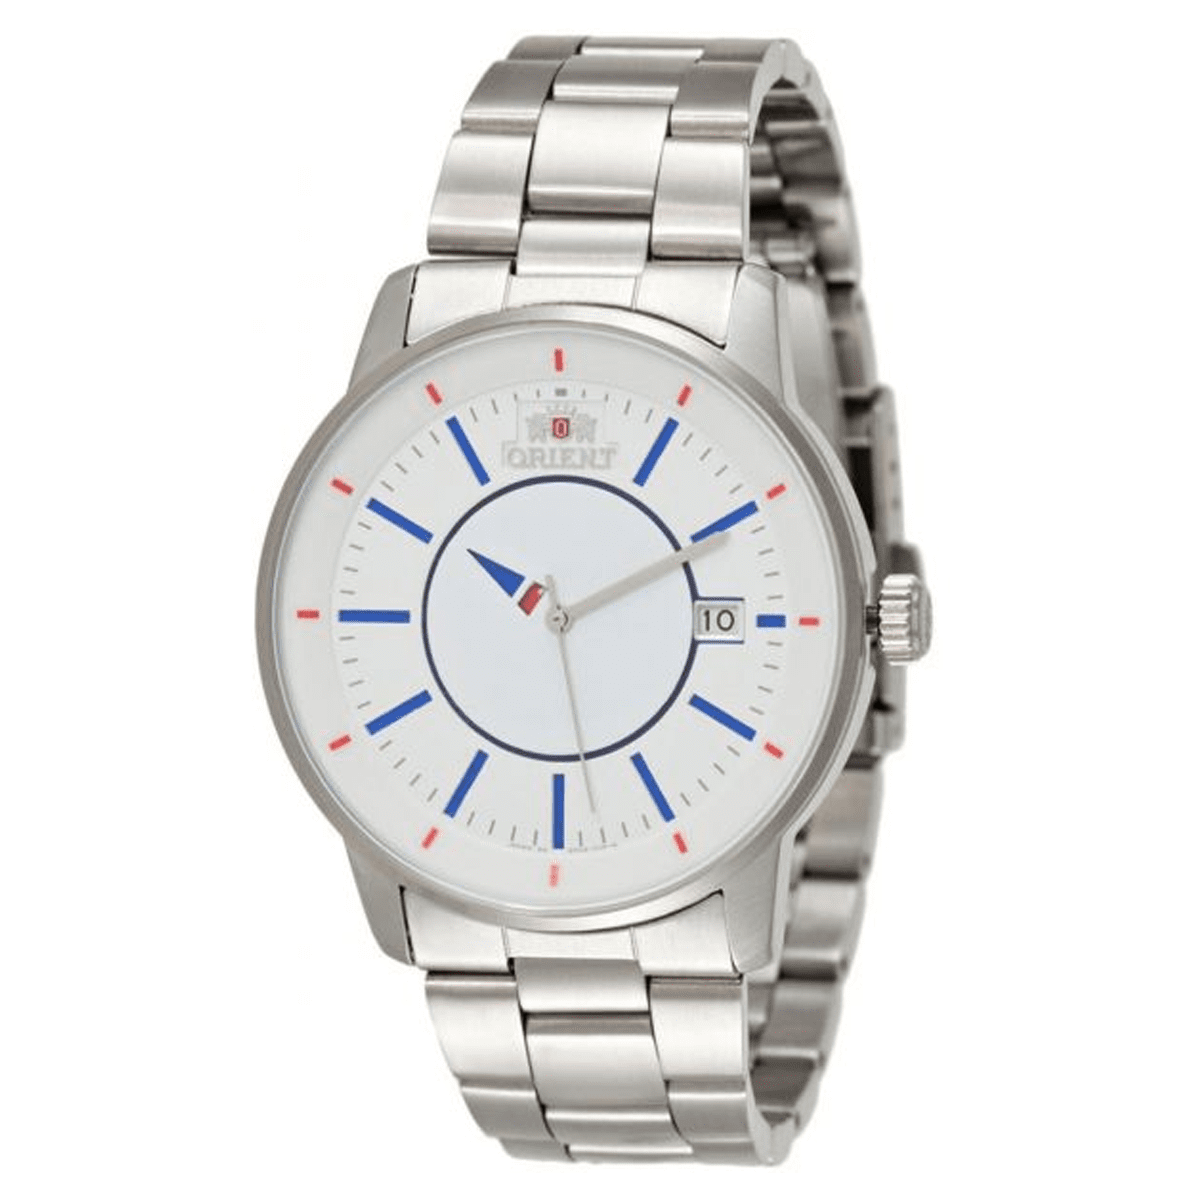 Orient Automatic White Dial Stainless Steel Band Watch for Men - SER0200F